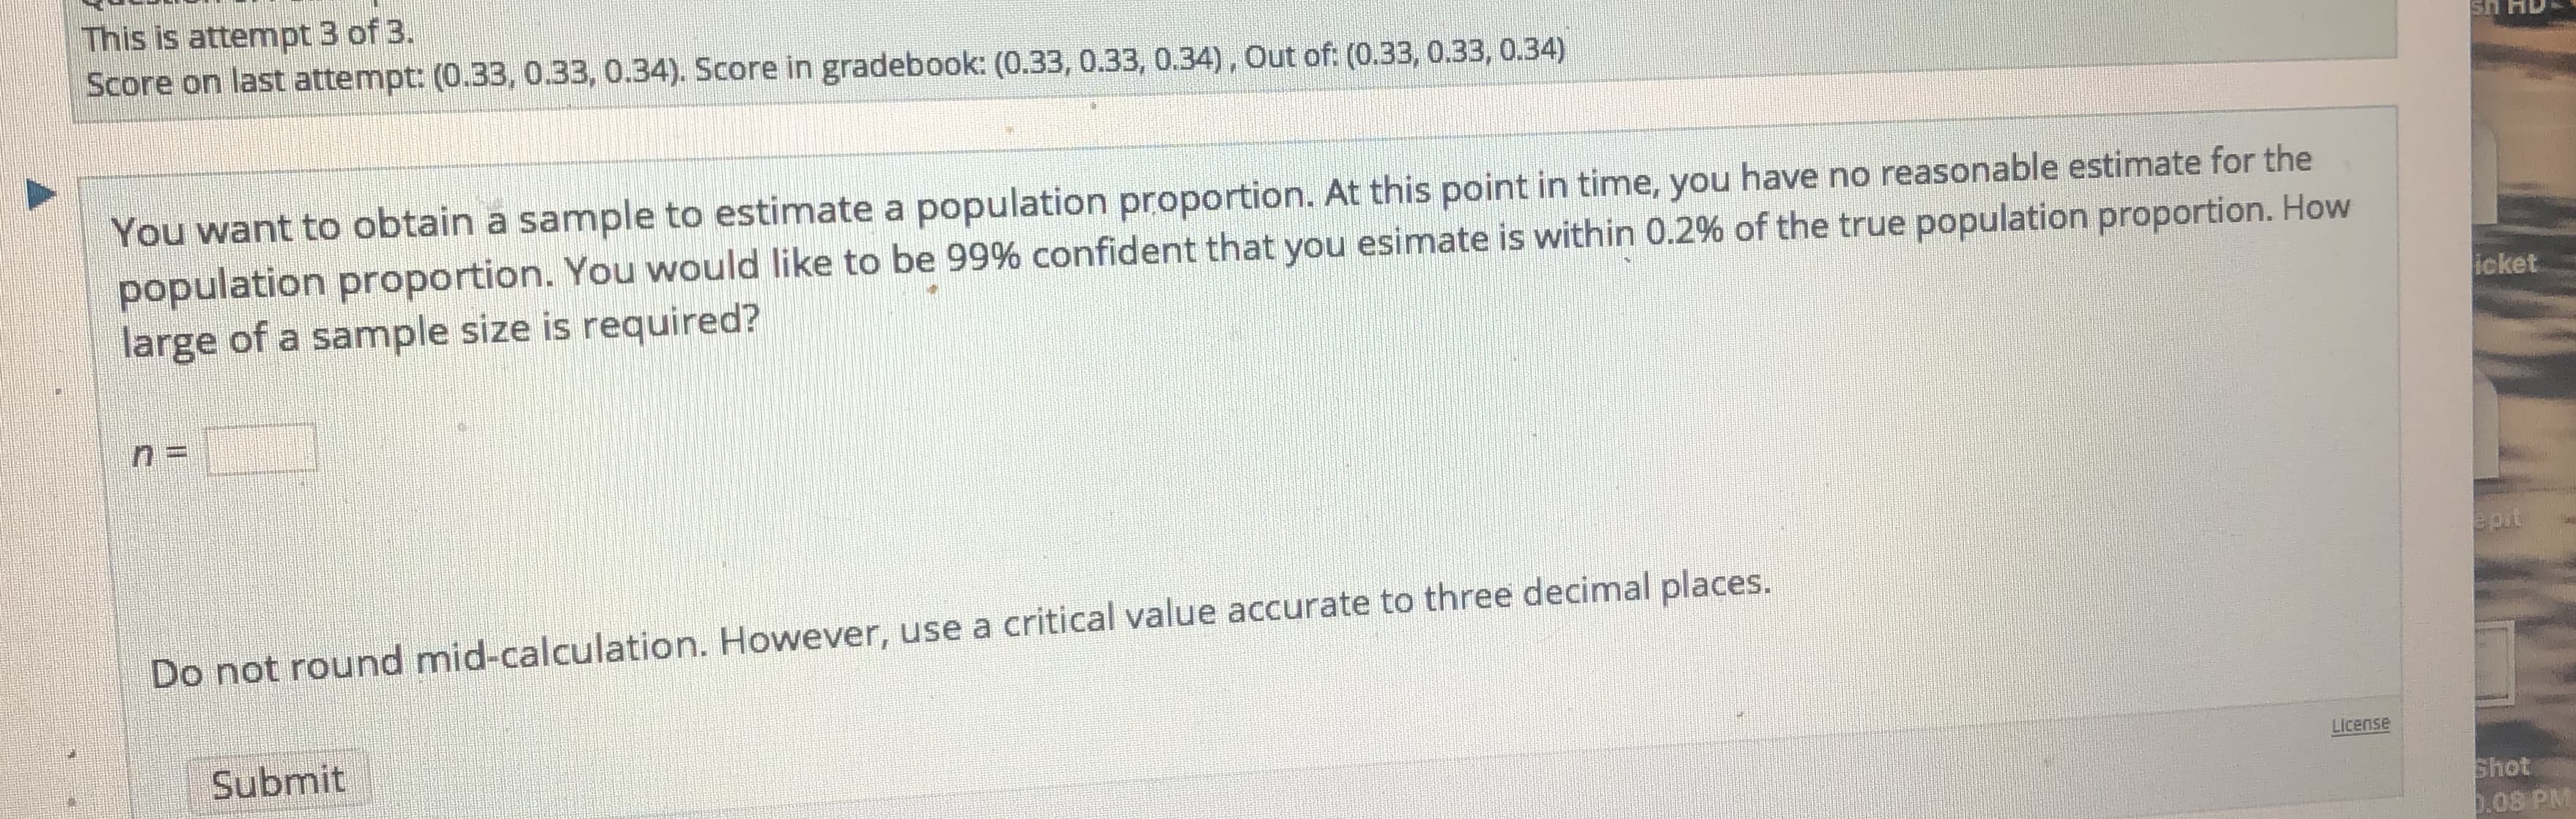 You want to obtain a sample to estimate a population proportion. At this point in time, you have no reasonable estimate for the
population proportion. You would like to be 99% confident that you esimate is within 0.2% of the true population proportion. How
large of a sample size is required?
Do not round mid-calculation. However, use a critical value accurate to three decimal places.
